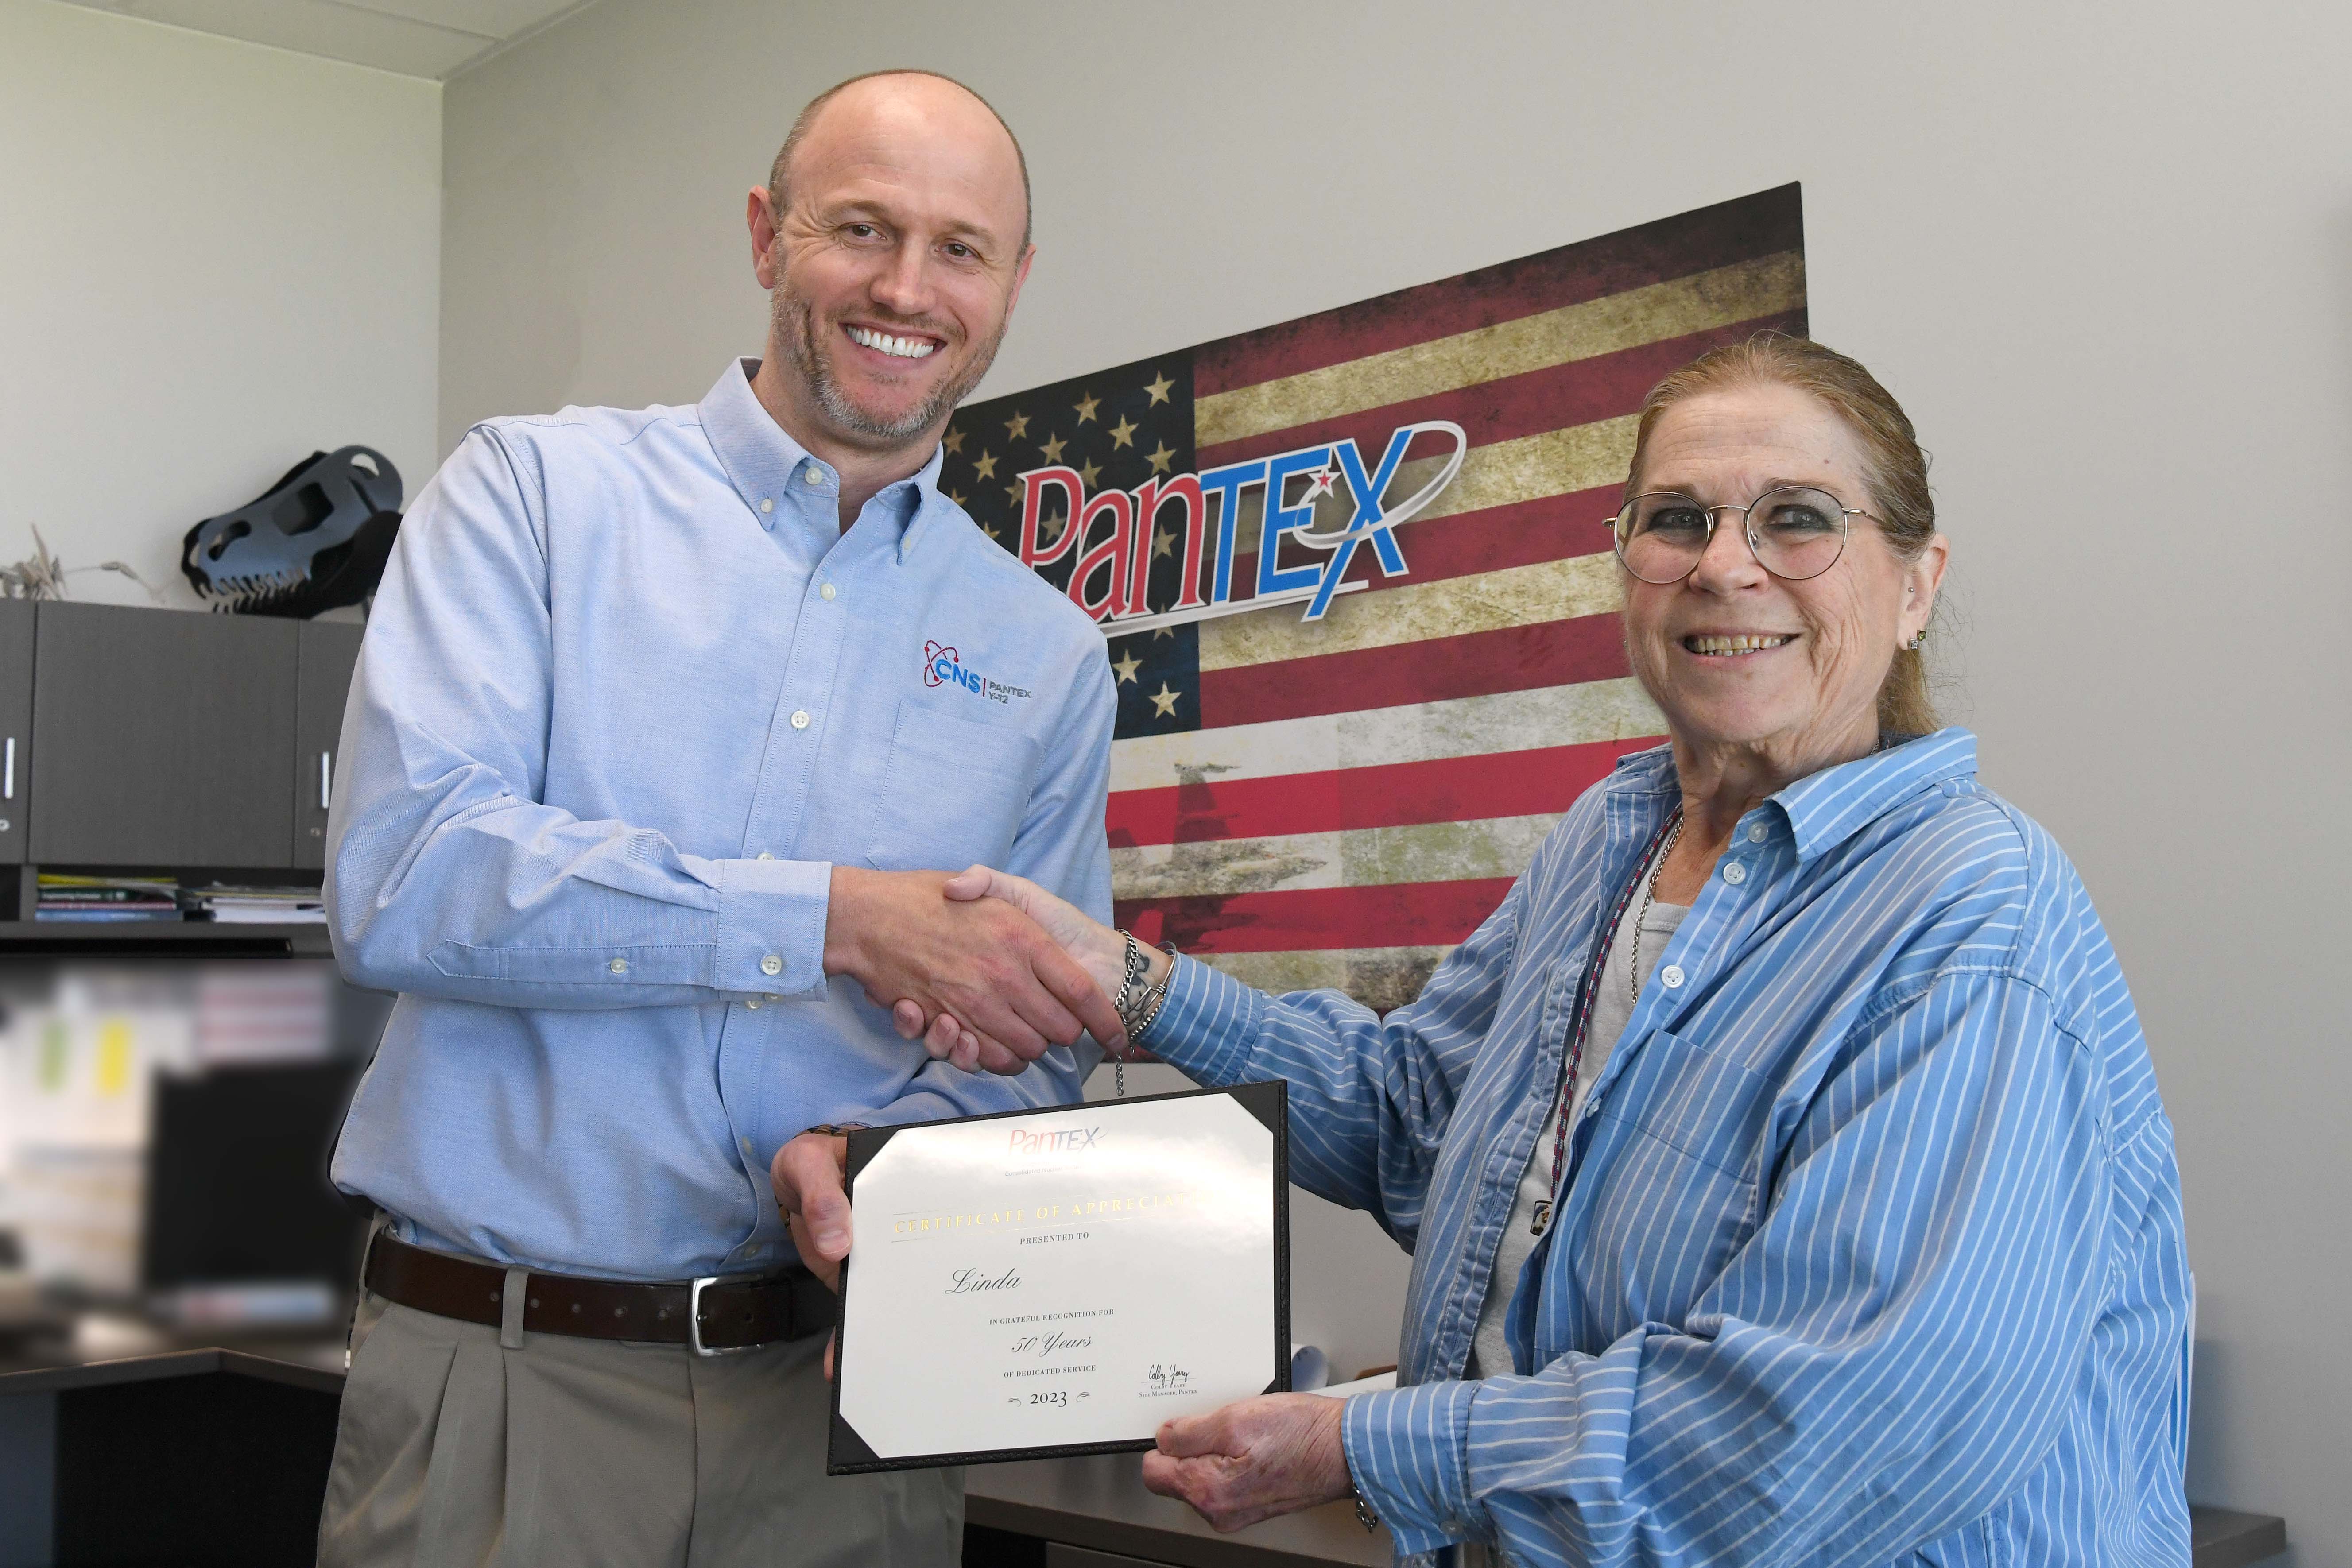 Linda Brohlin was recognized for her service by Site Manager Colby Yeary